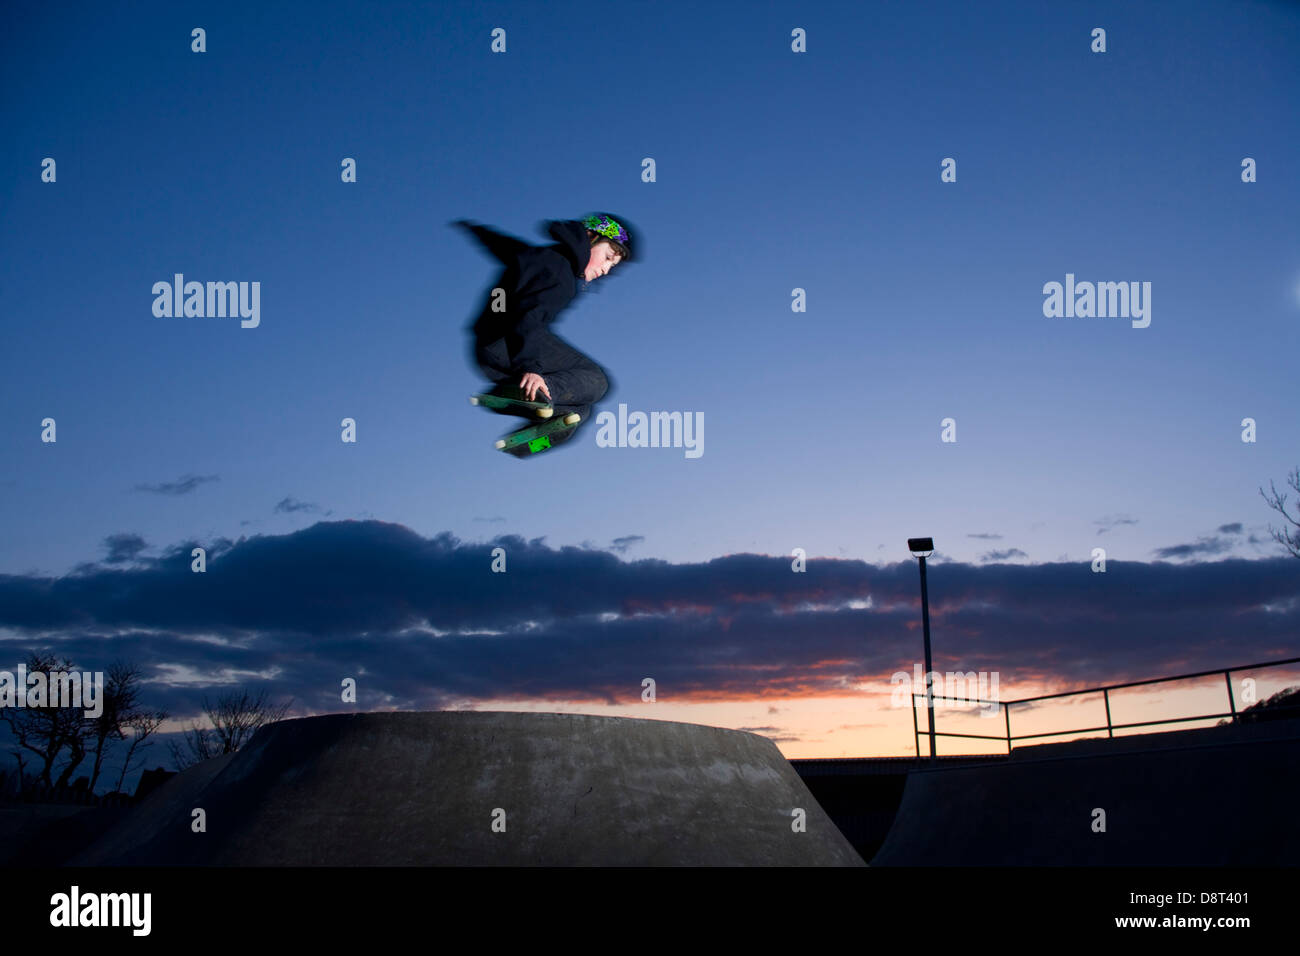 Young Inline skater jumping in a skate park. Stock Photo